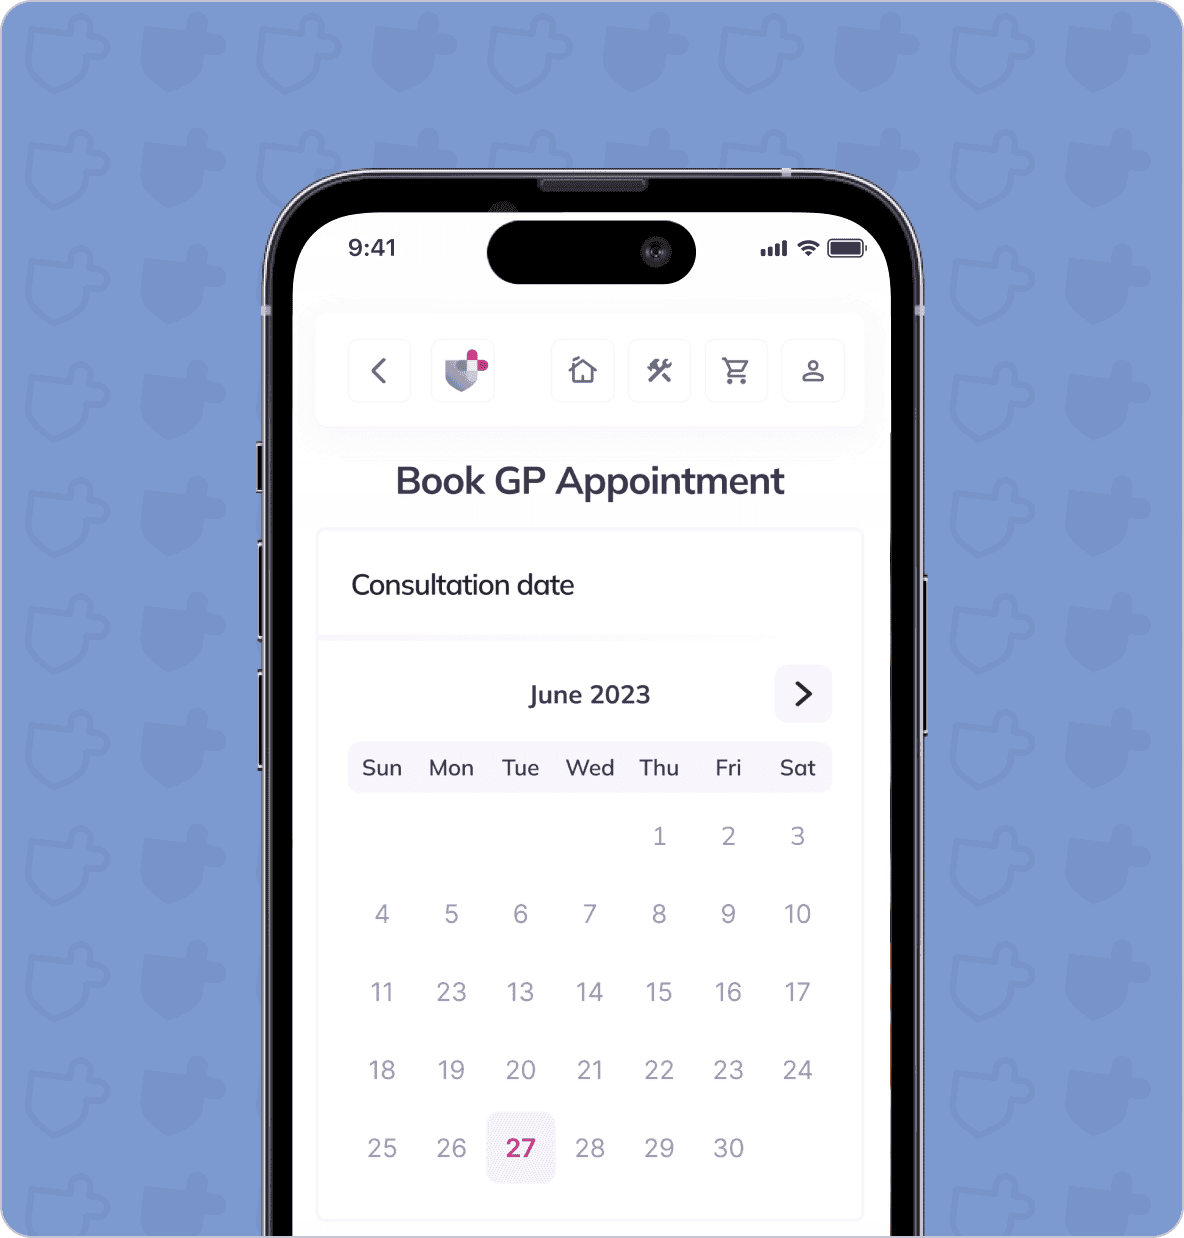 Smartphone screen displaying a "Book GP Appointment" interface with a calendar set to June 2023. The 27th is highlighted in red.